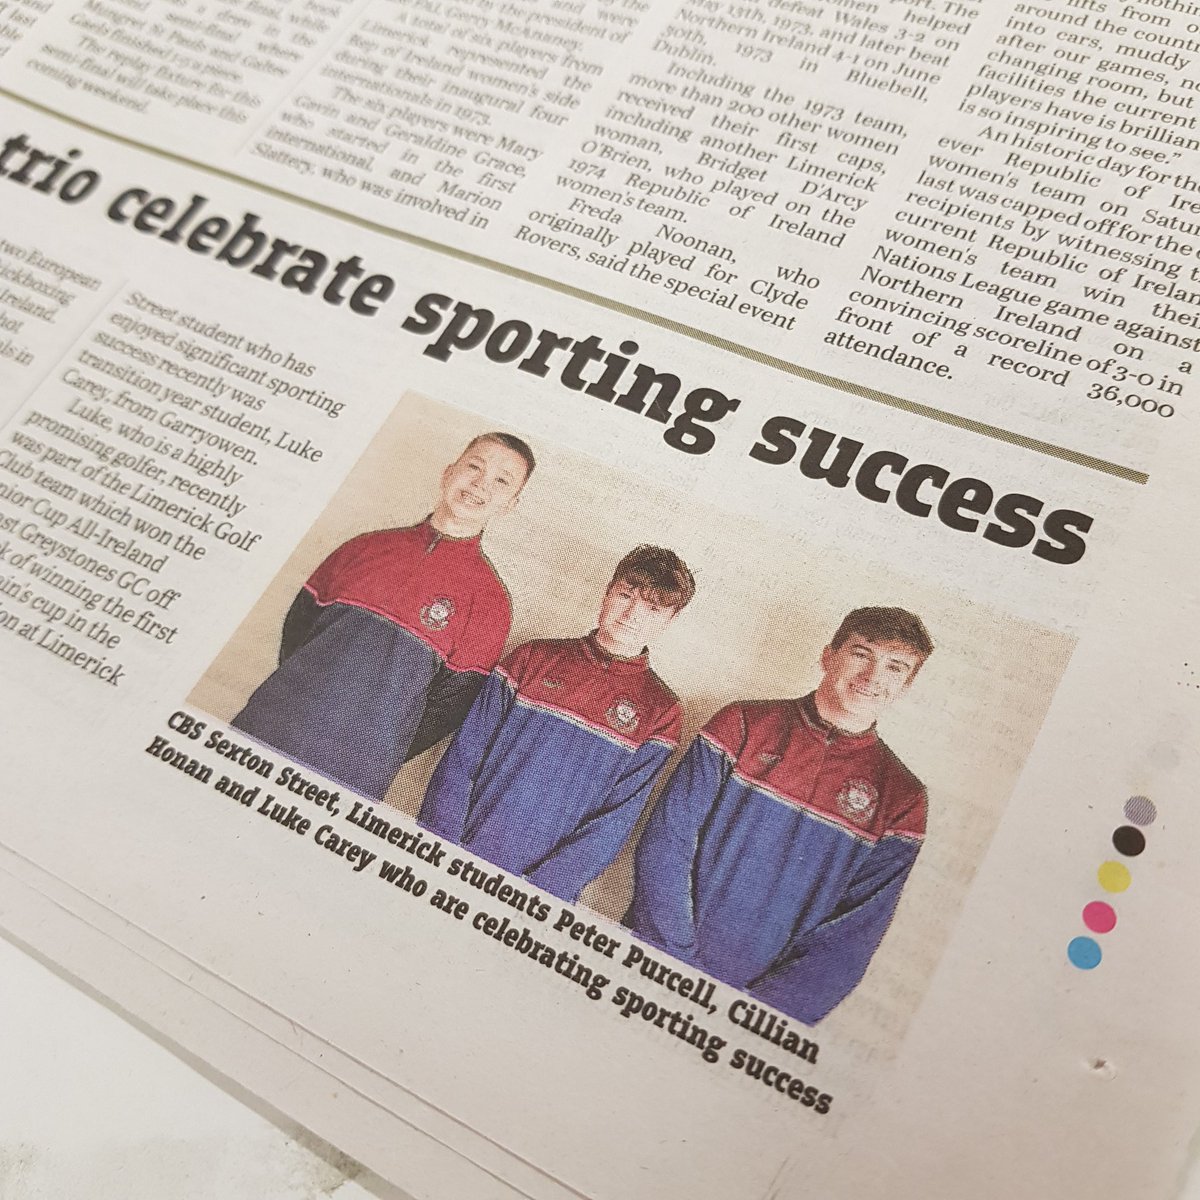 💫 Thank you to Siadbh Redmond from the @Limerick_Leader for interviewing our award winning students. Luke Carey is a Junior All-Ireland Golf Champion, Cillian Honan is a 2 European Silver Medal in Kickboxing and Peter Purcell is a European Gold Medal winner in Tang Soo Do. 🏆💫